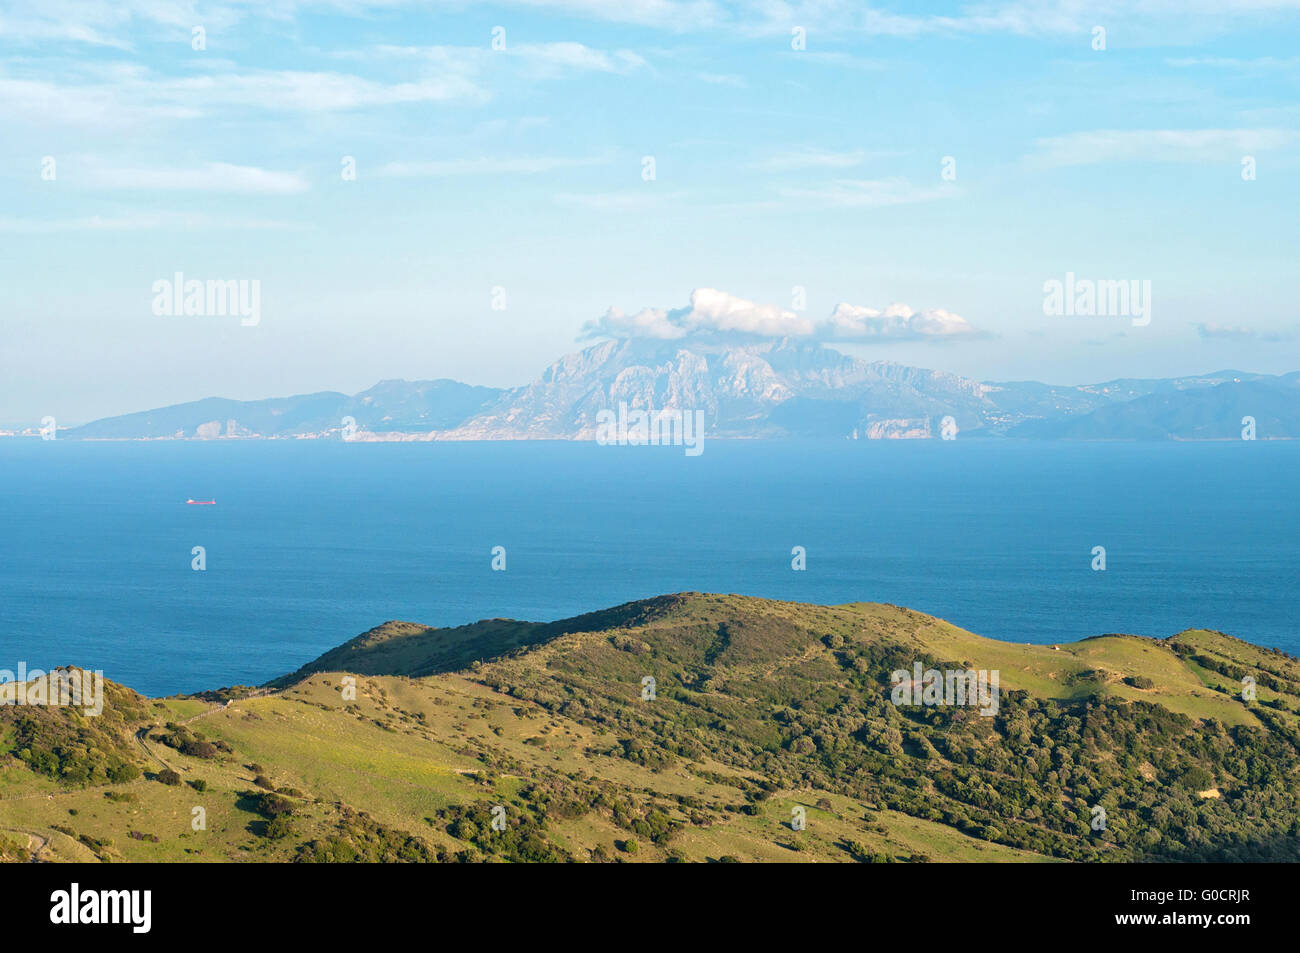 A view of Morocco across the Strait of Gibraltar Stock Photo